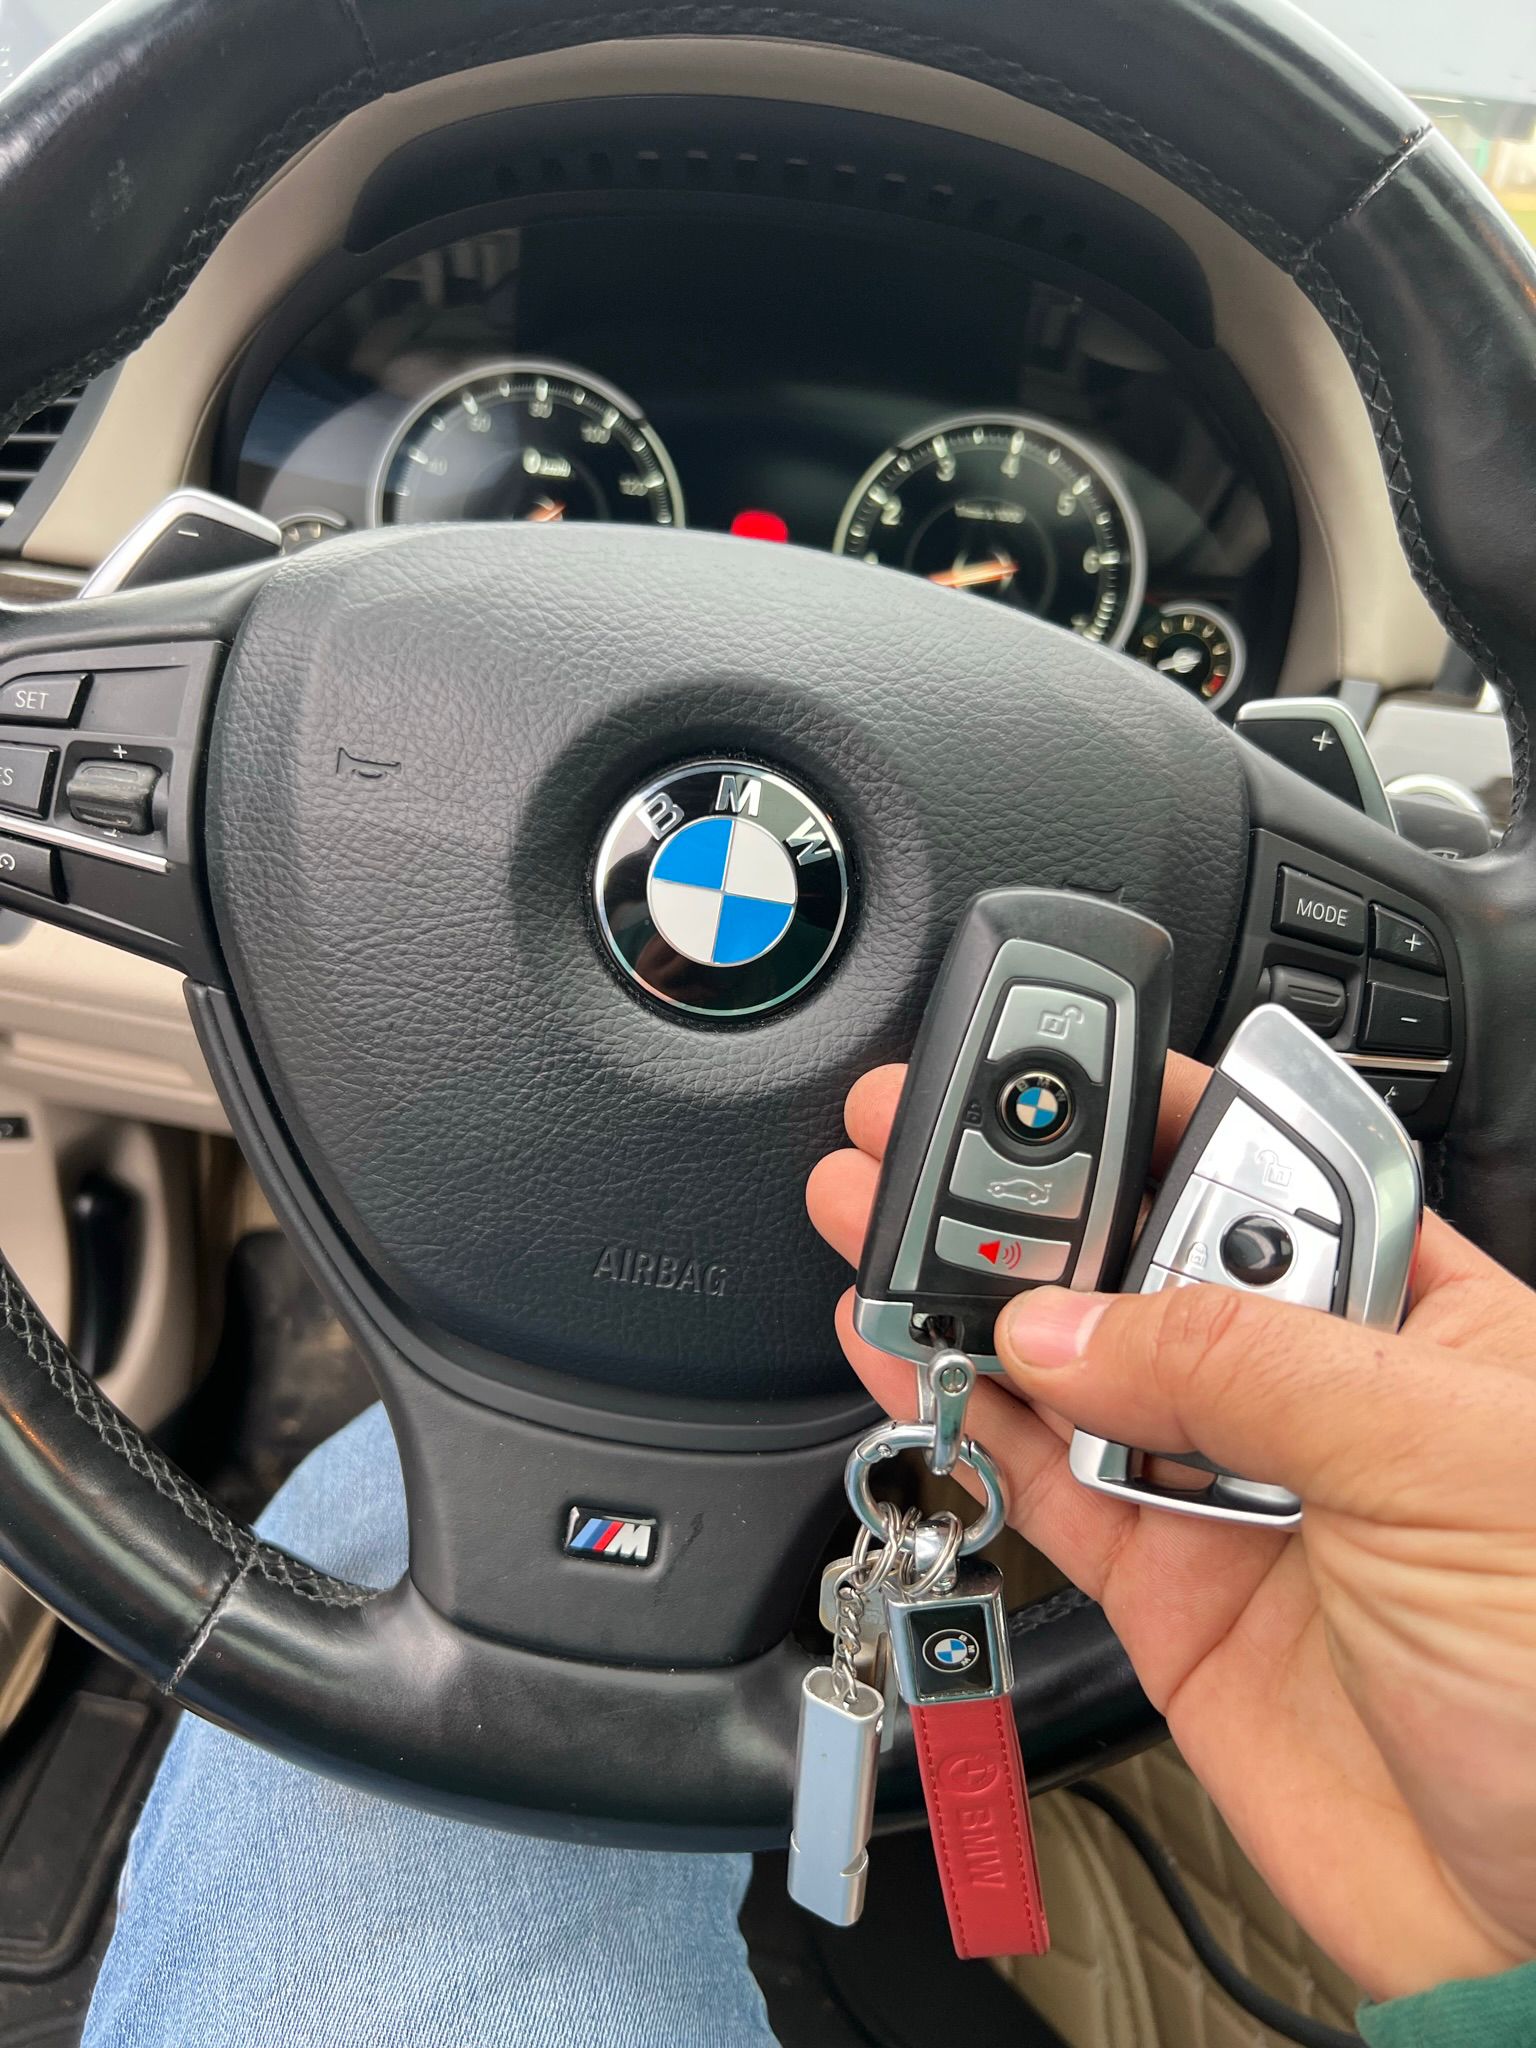 BMW keys replacement Louisville KY (17)